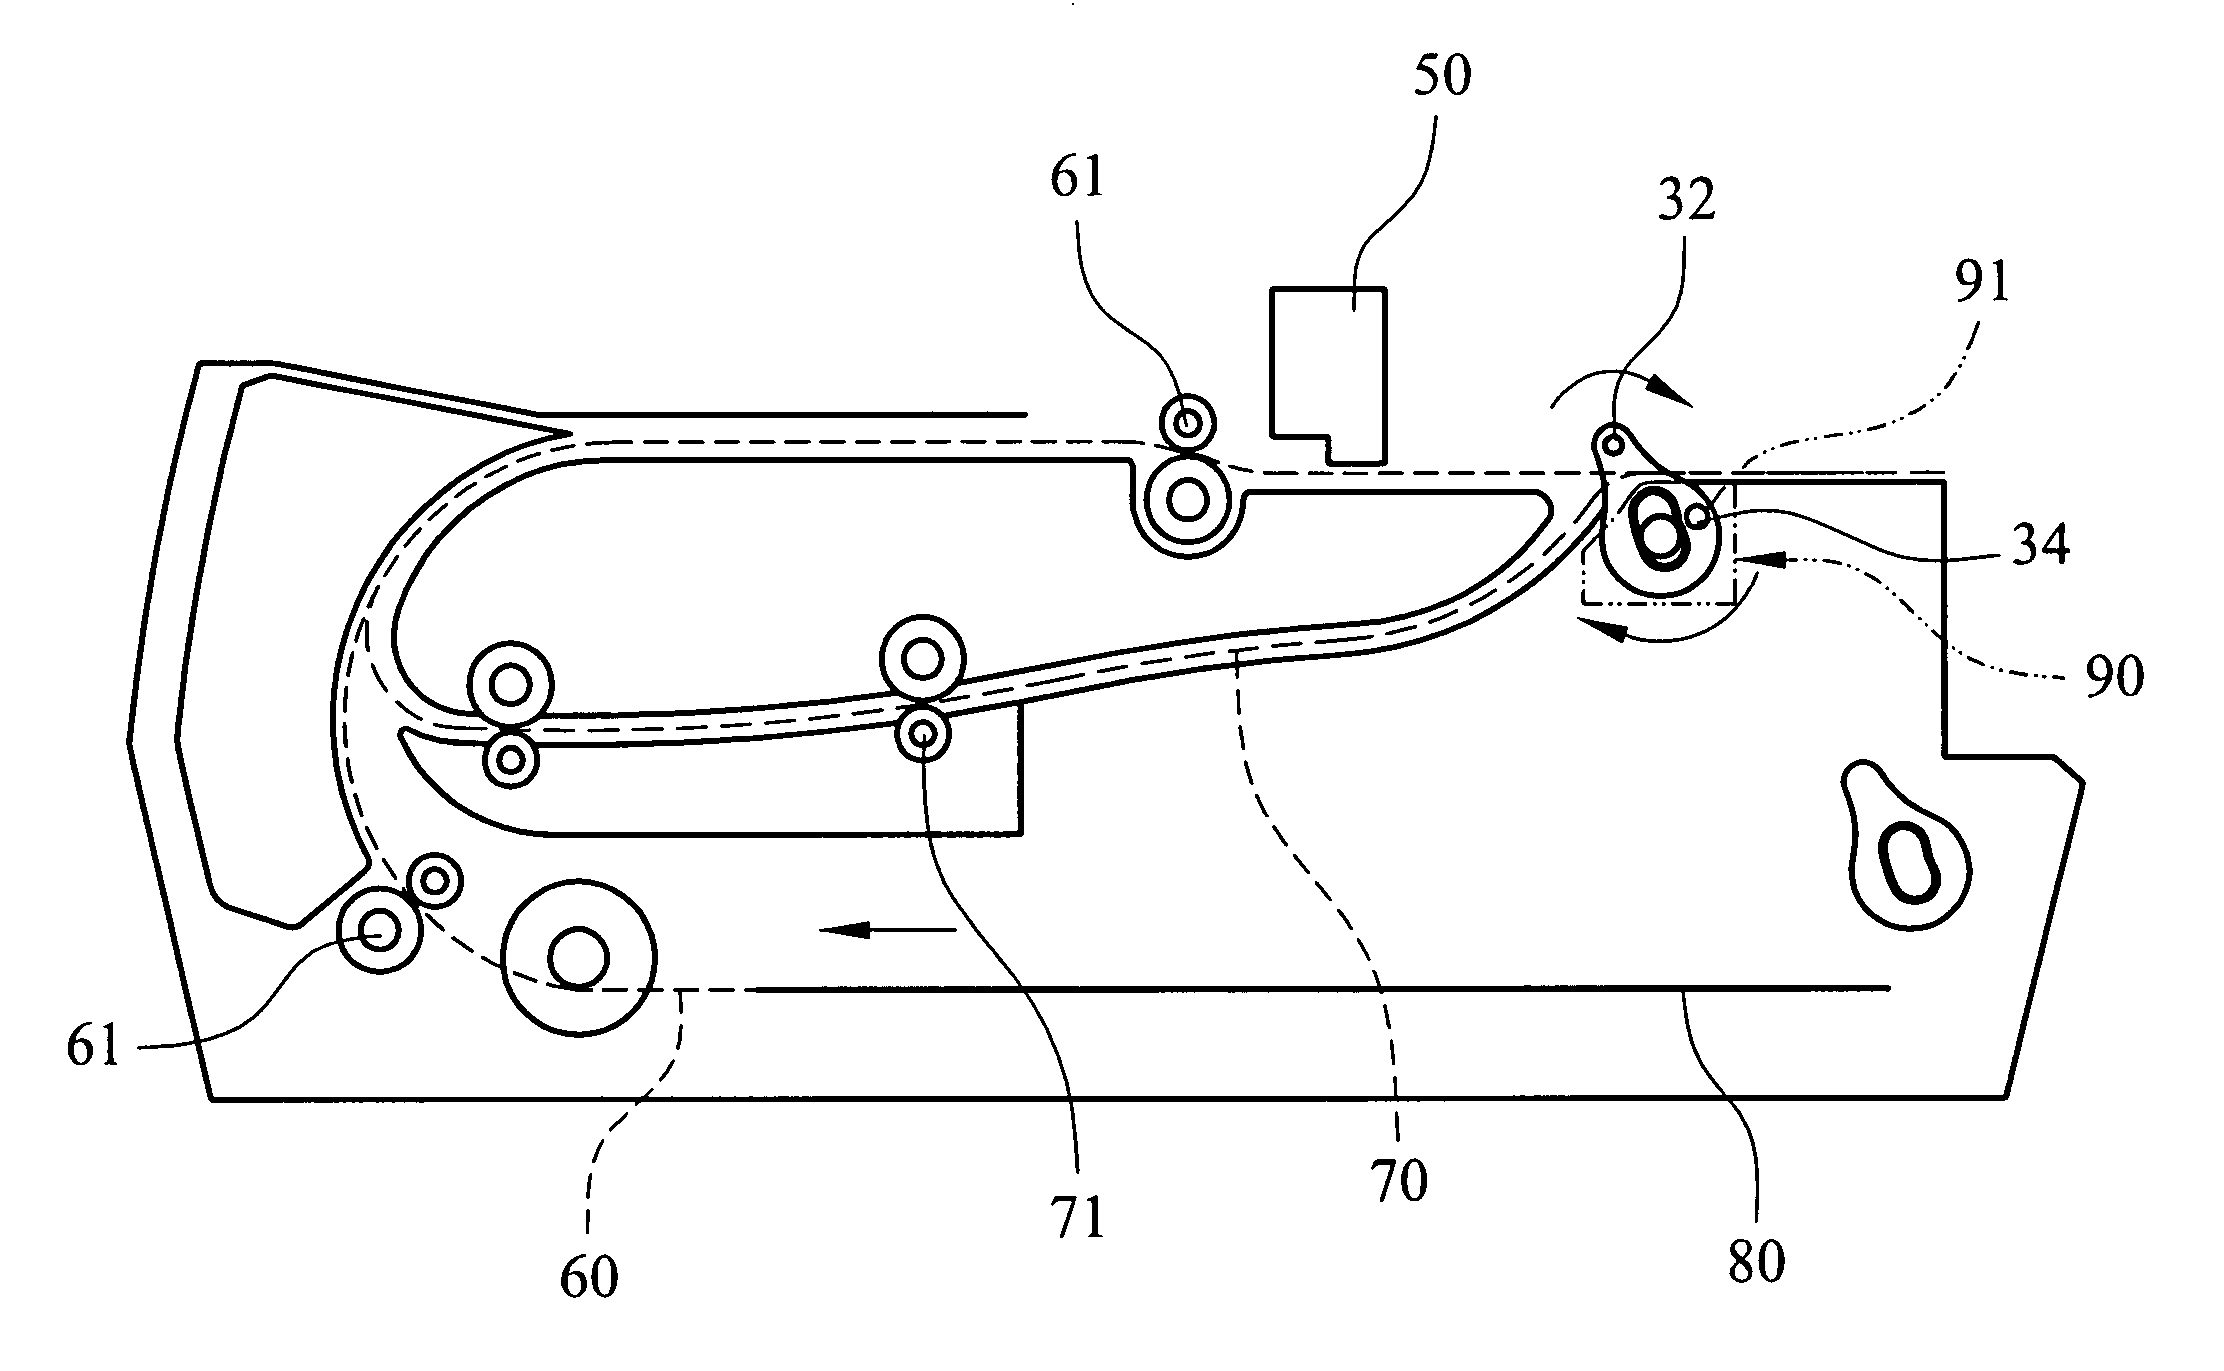 Paper conveying apparatus and method for flipping paper